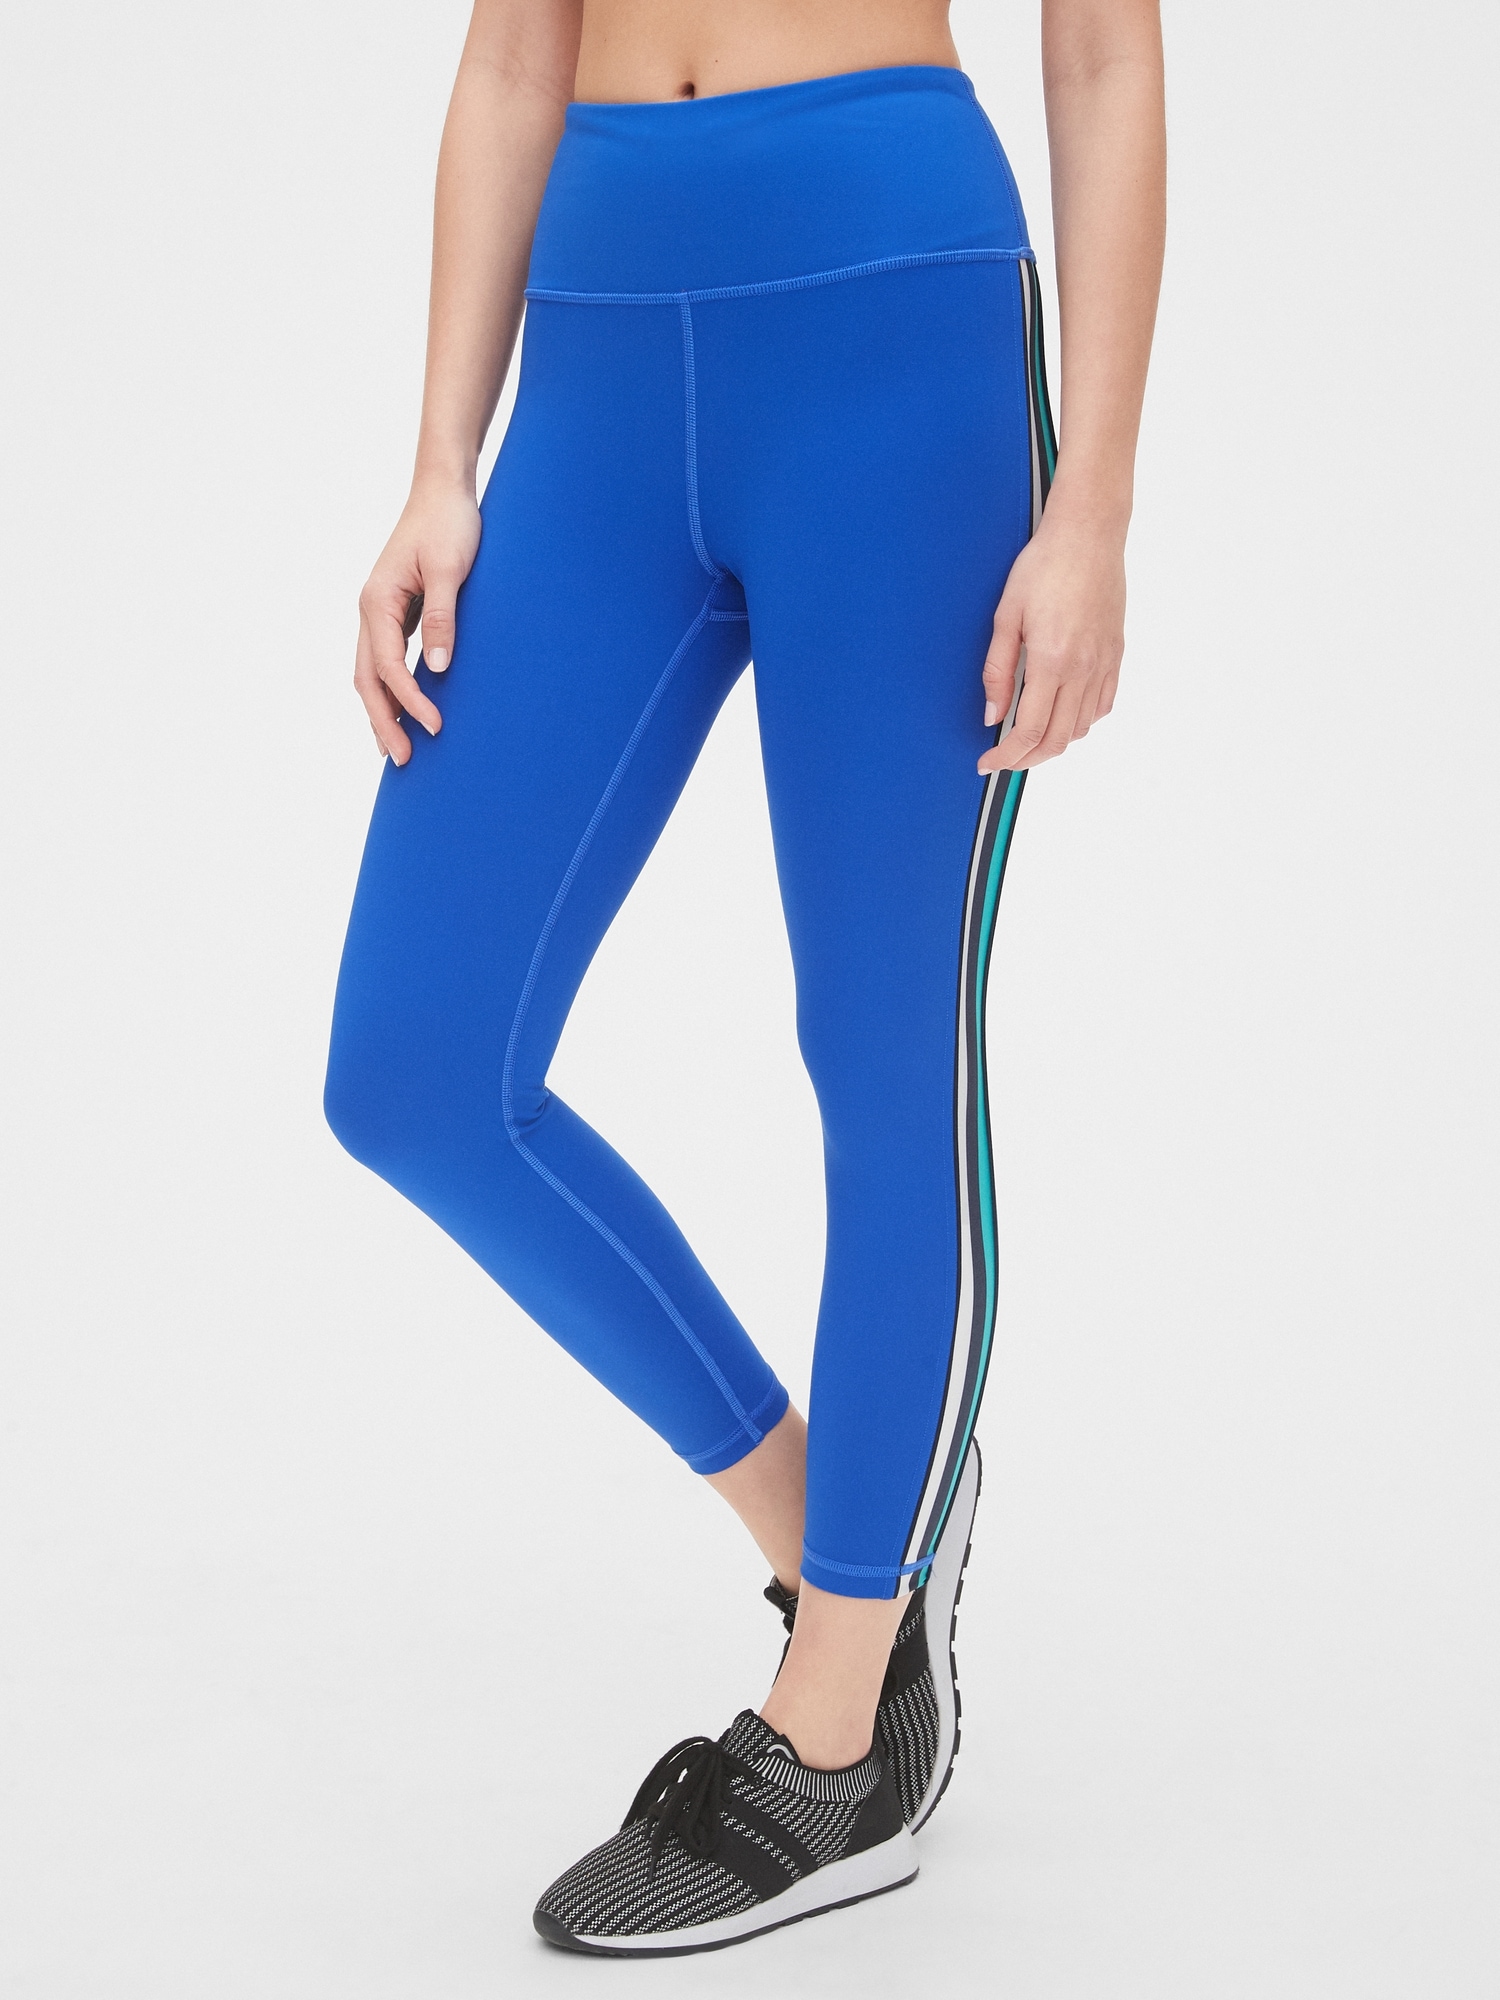 GapFit High Rise 7/8 Leggings in Eclipse, The Deals At Gap Are Always  Good, But Have You Seen the Workout Clothes?